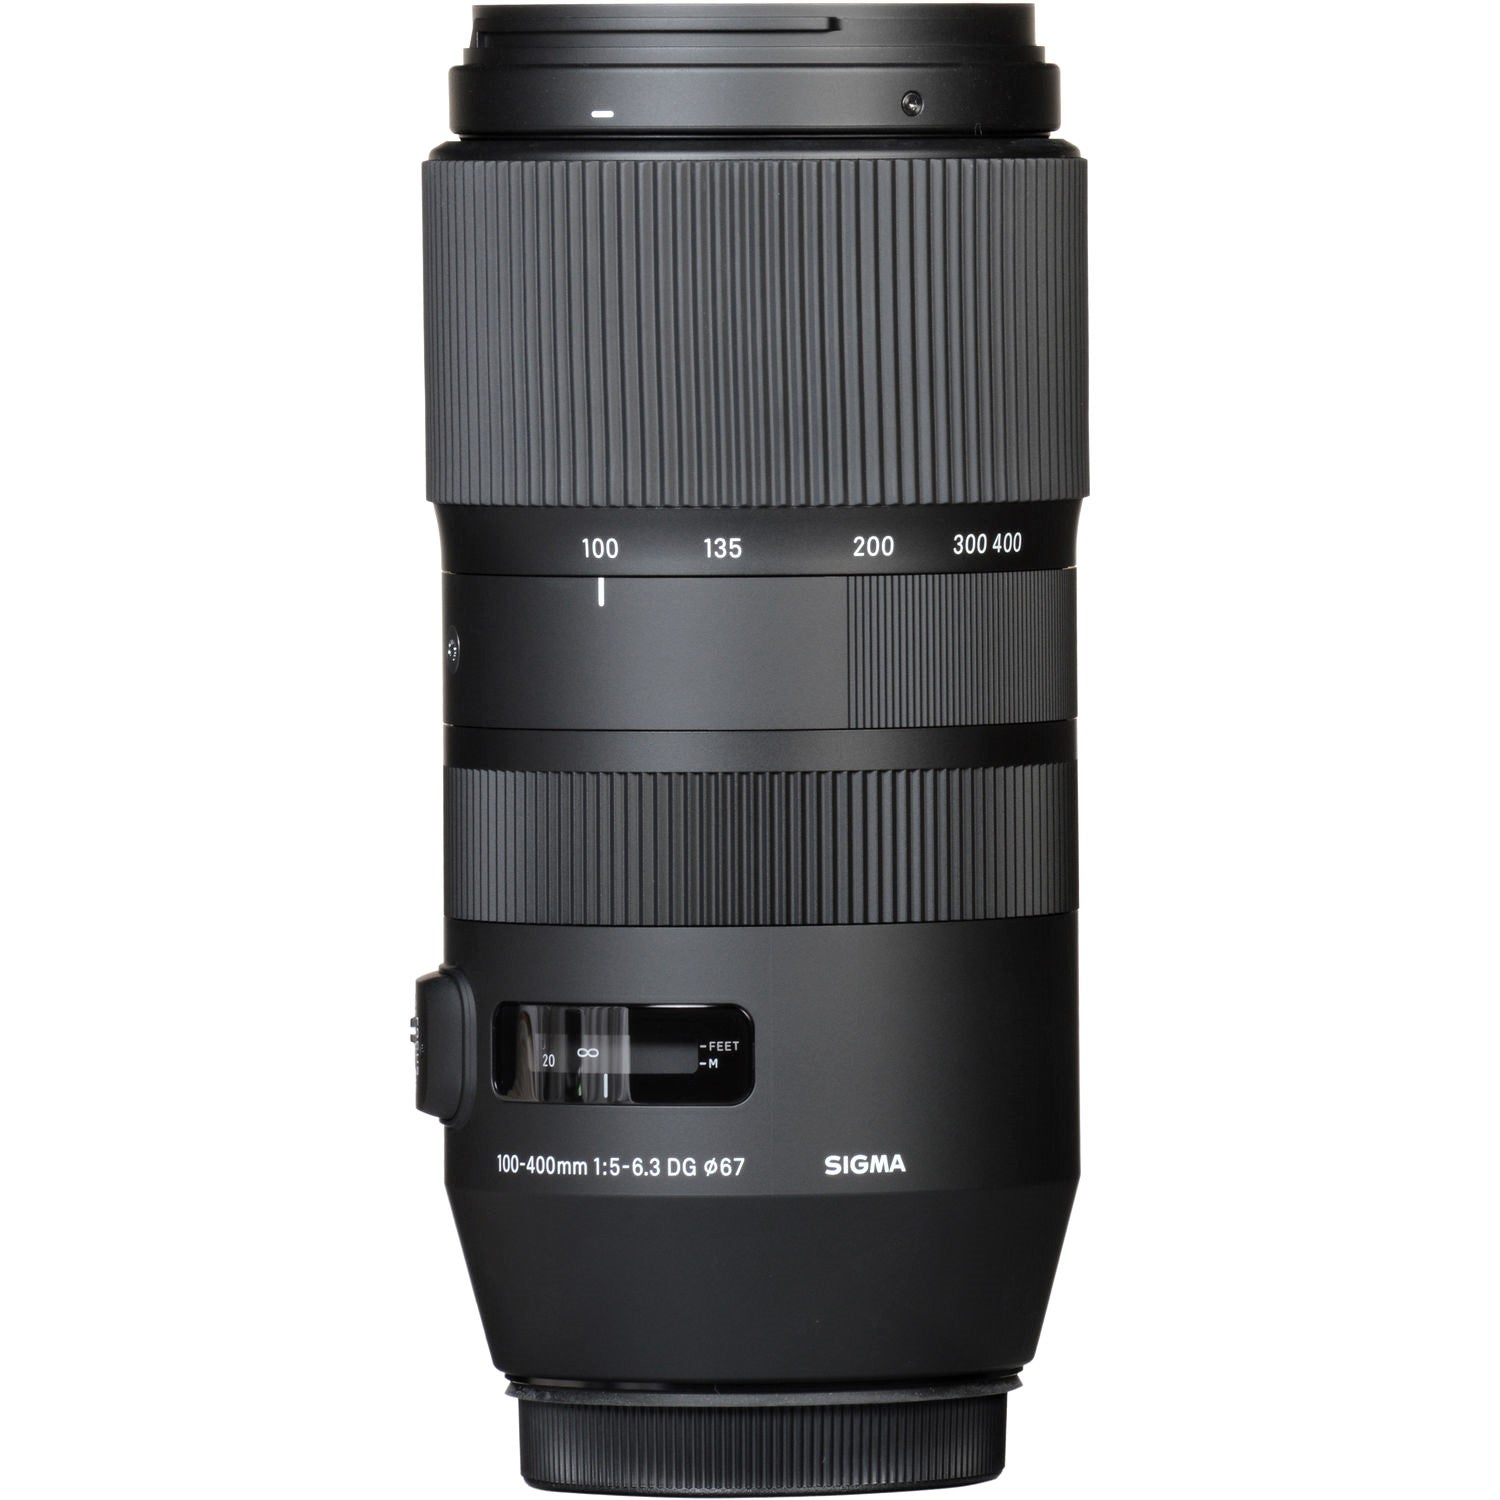 Sigma 100-400mm F5-6.3 DG OS HSM Contemporary Lens for Canon EF